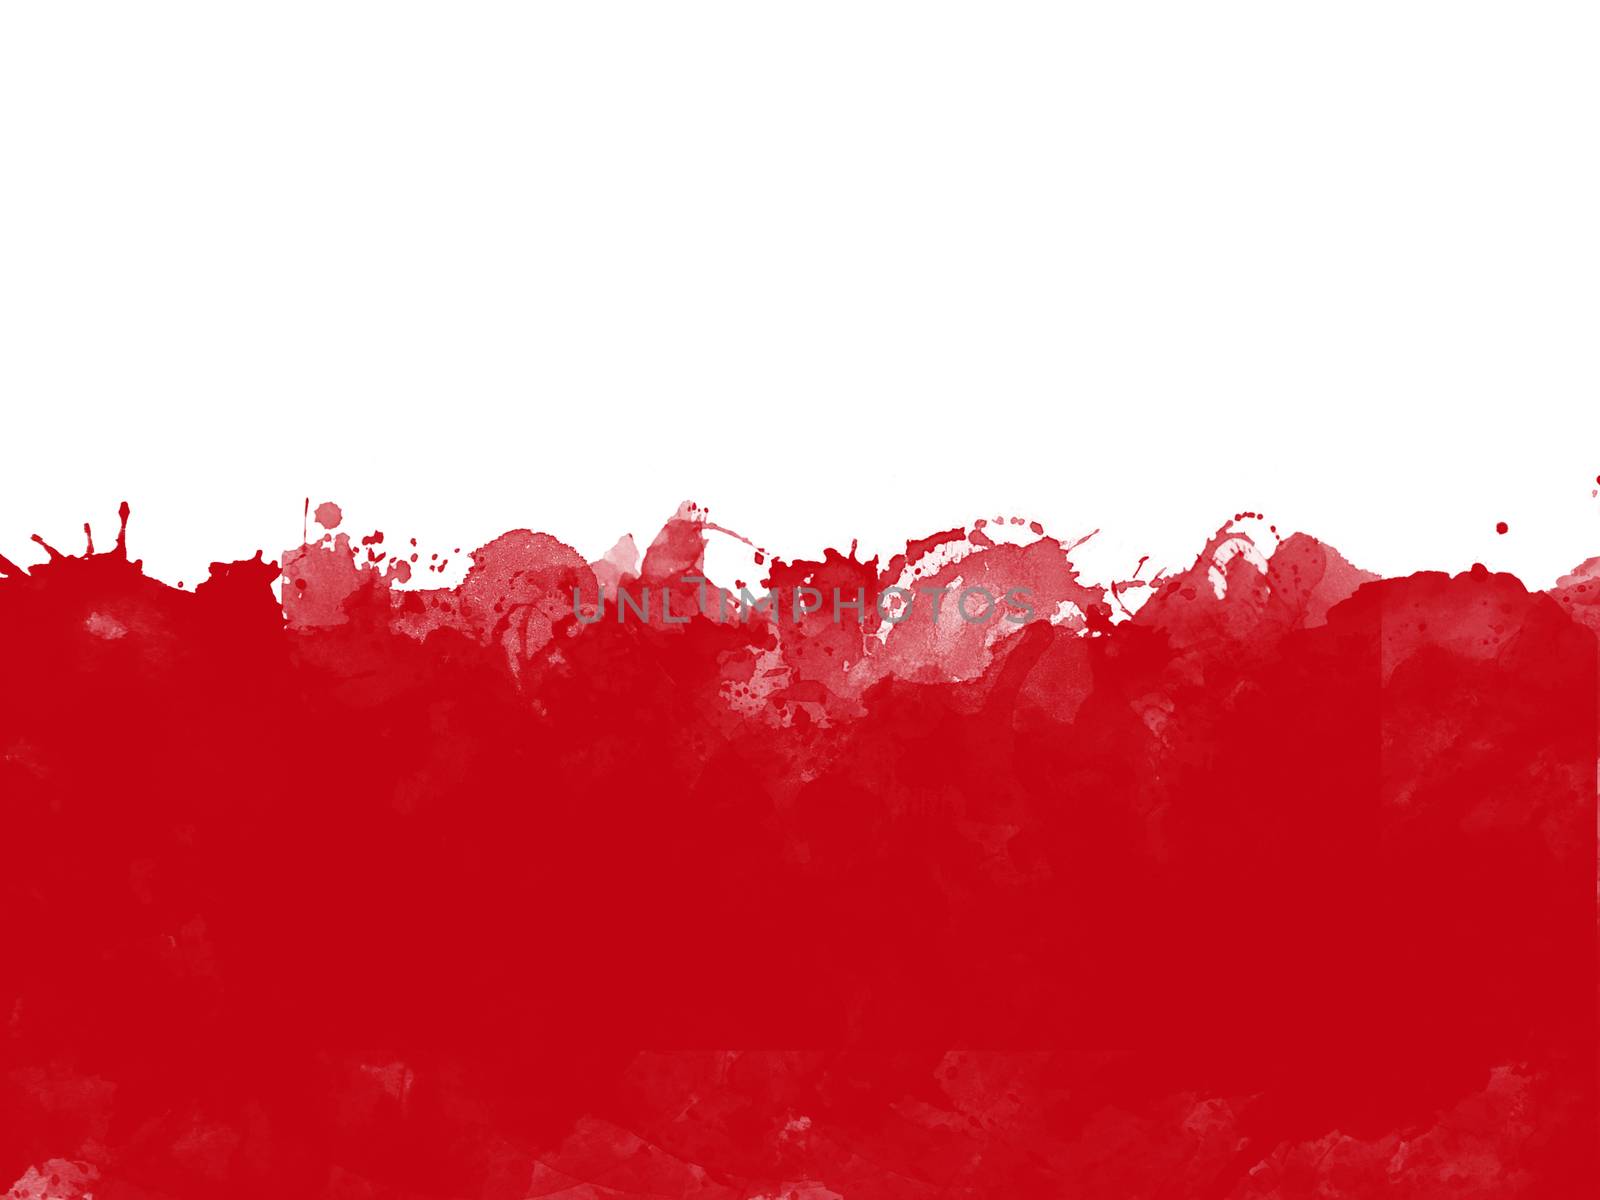 Flag of Poland by watercolor paint brush, grunge style